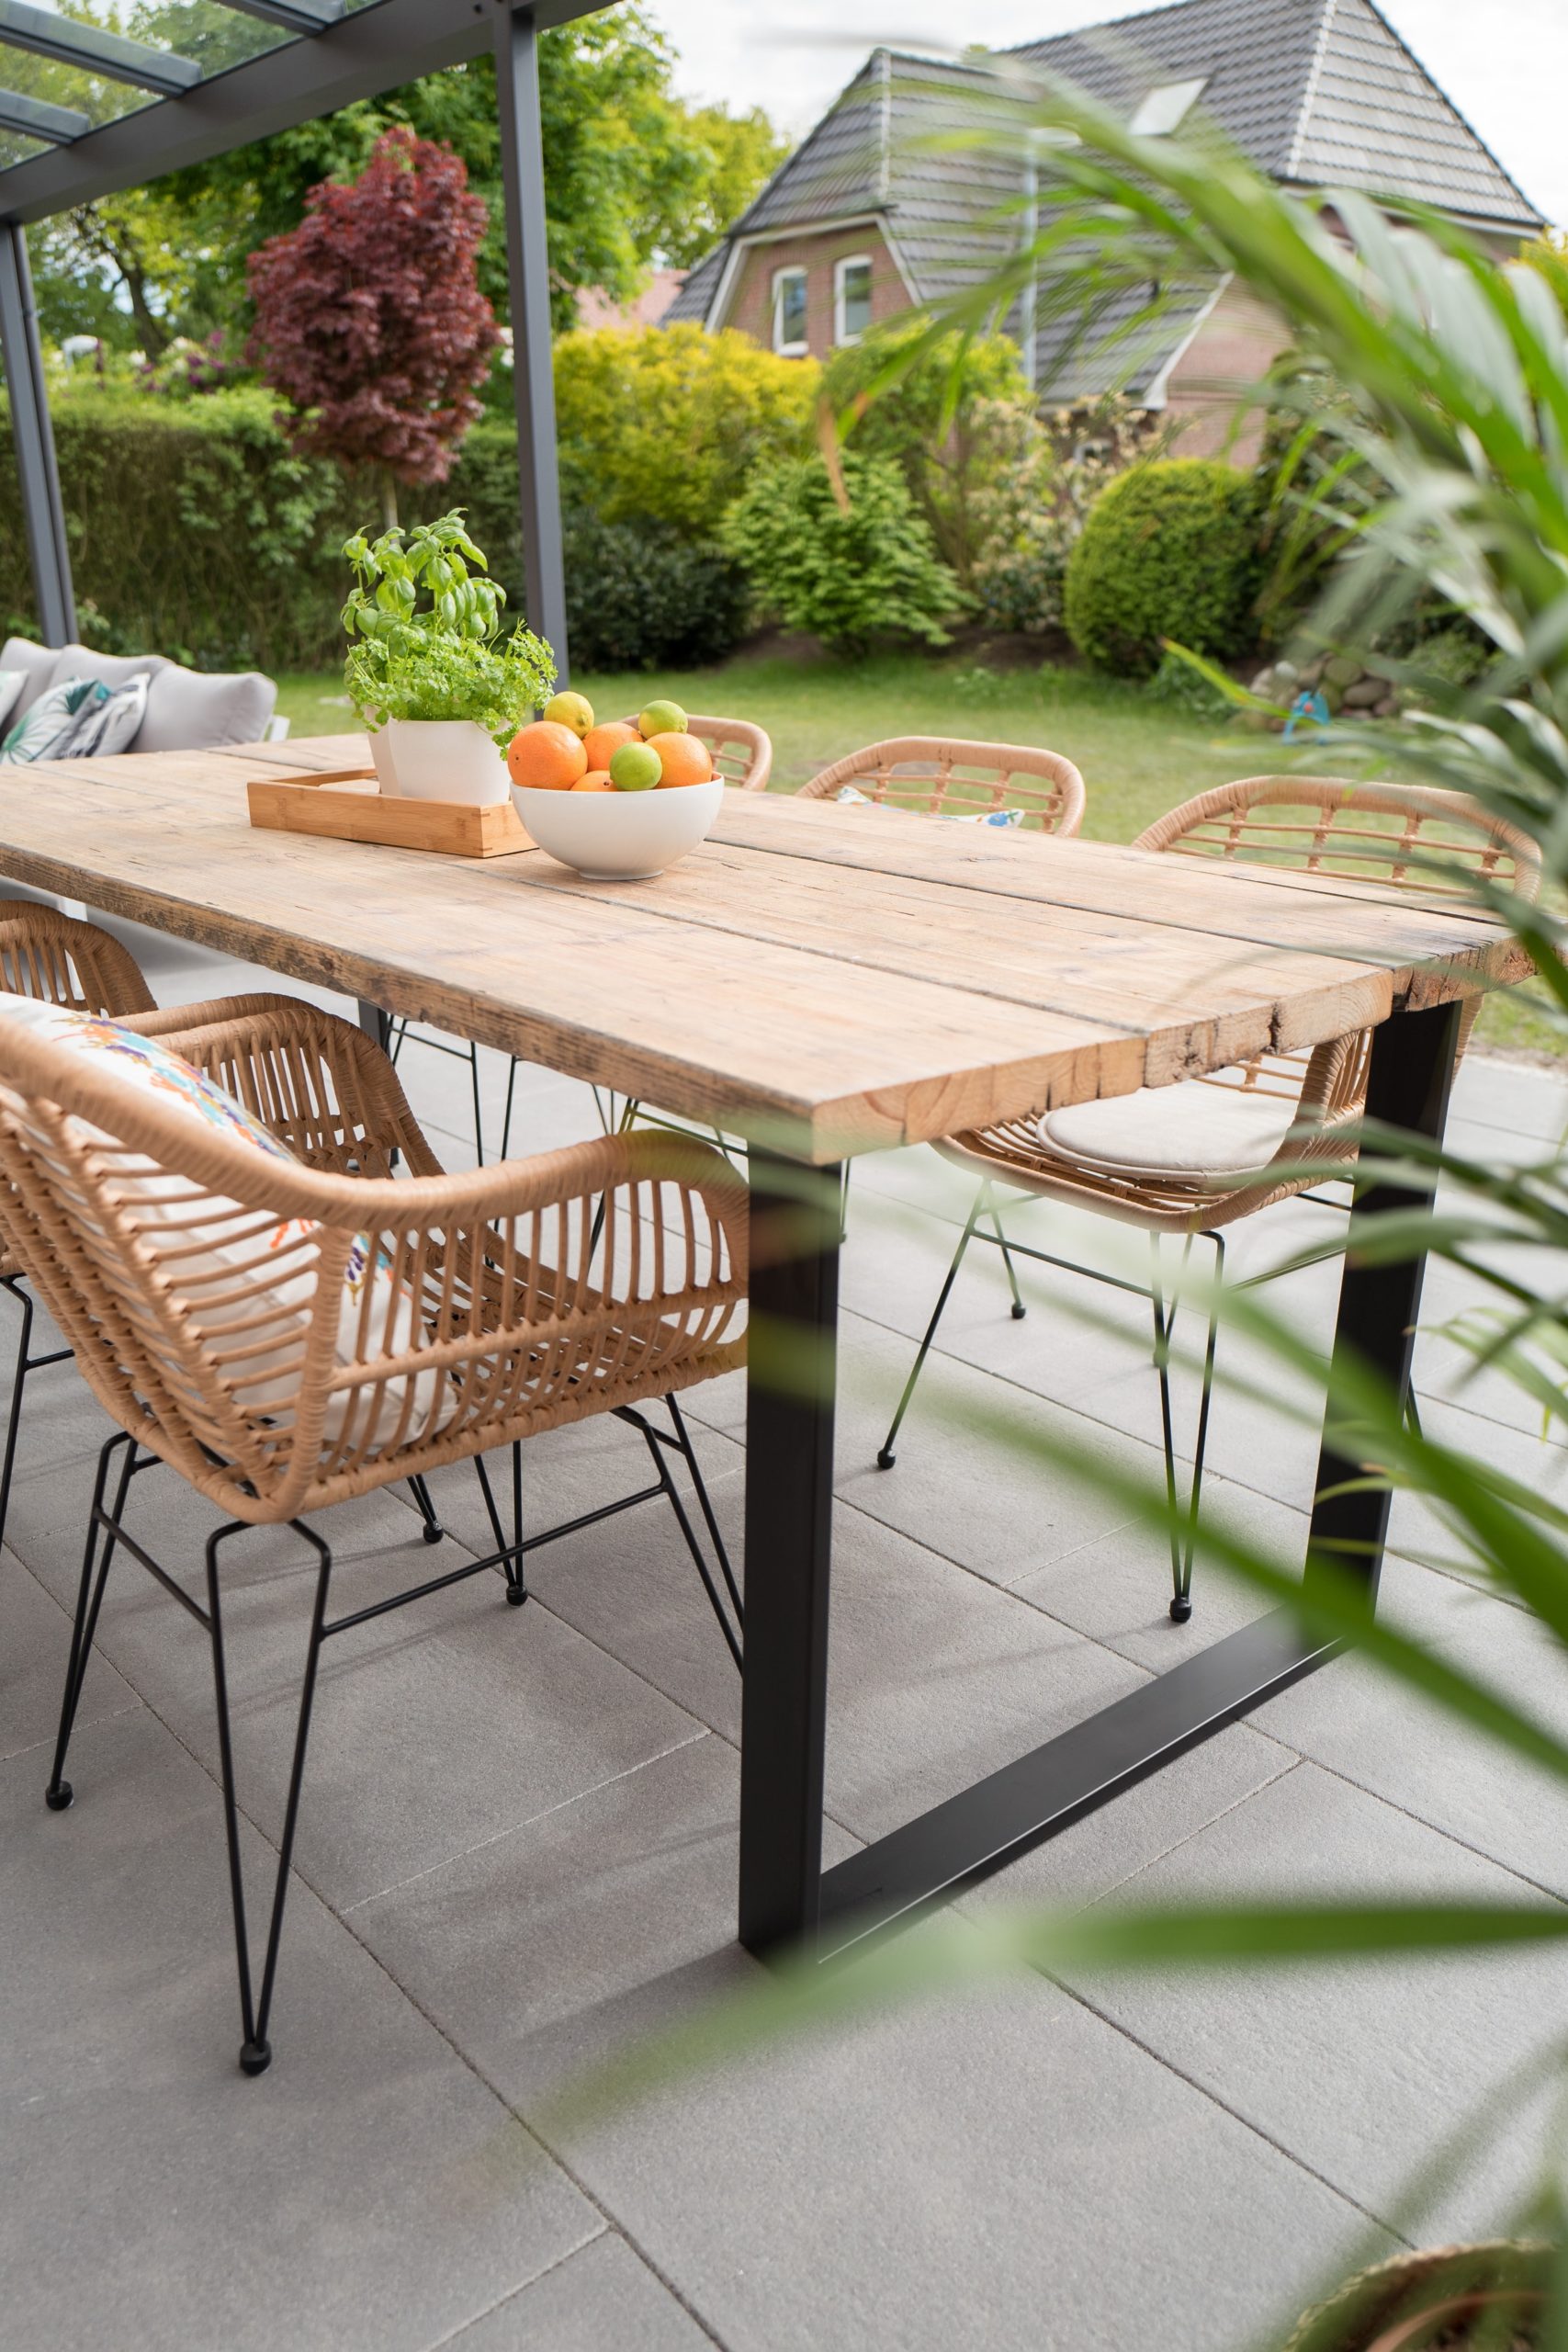 5 Tips for Pressure Washing Outdoor Furniture